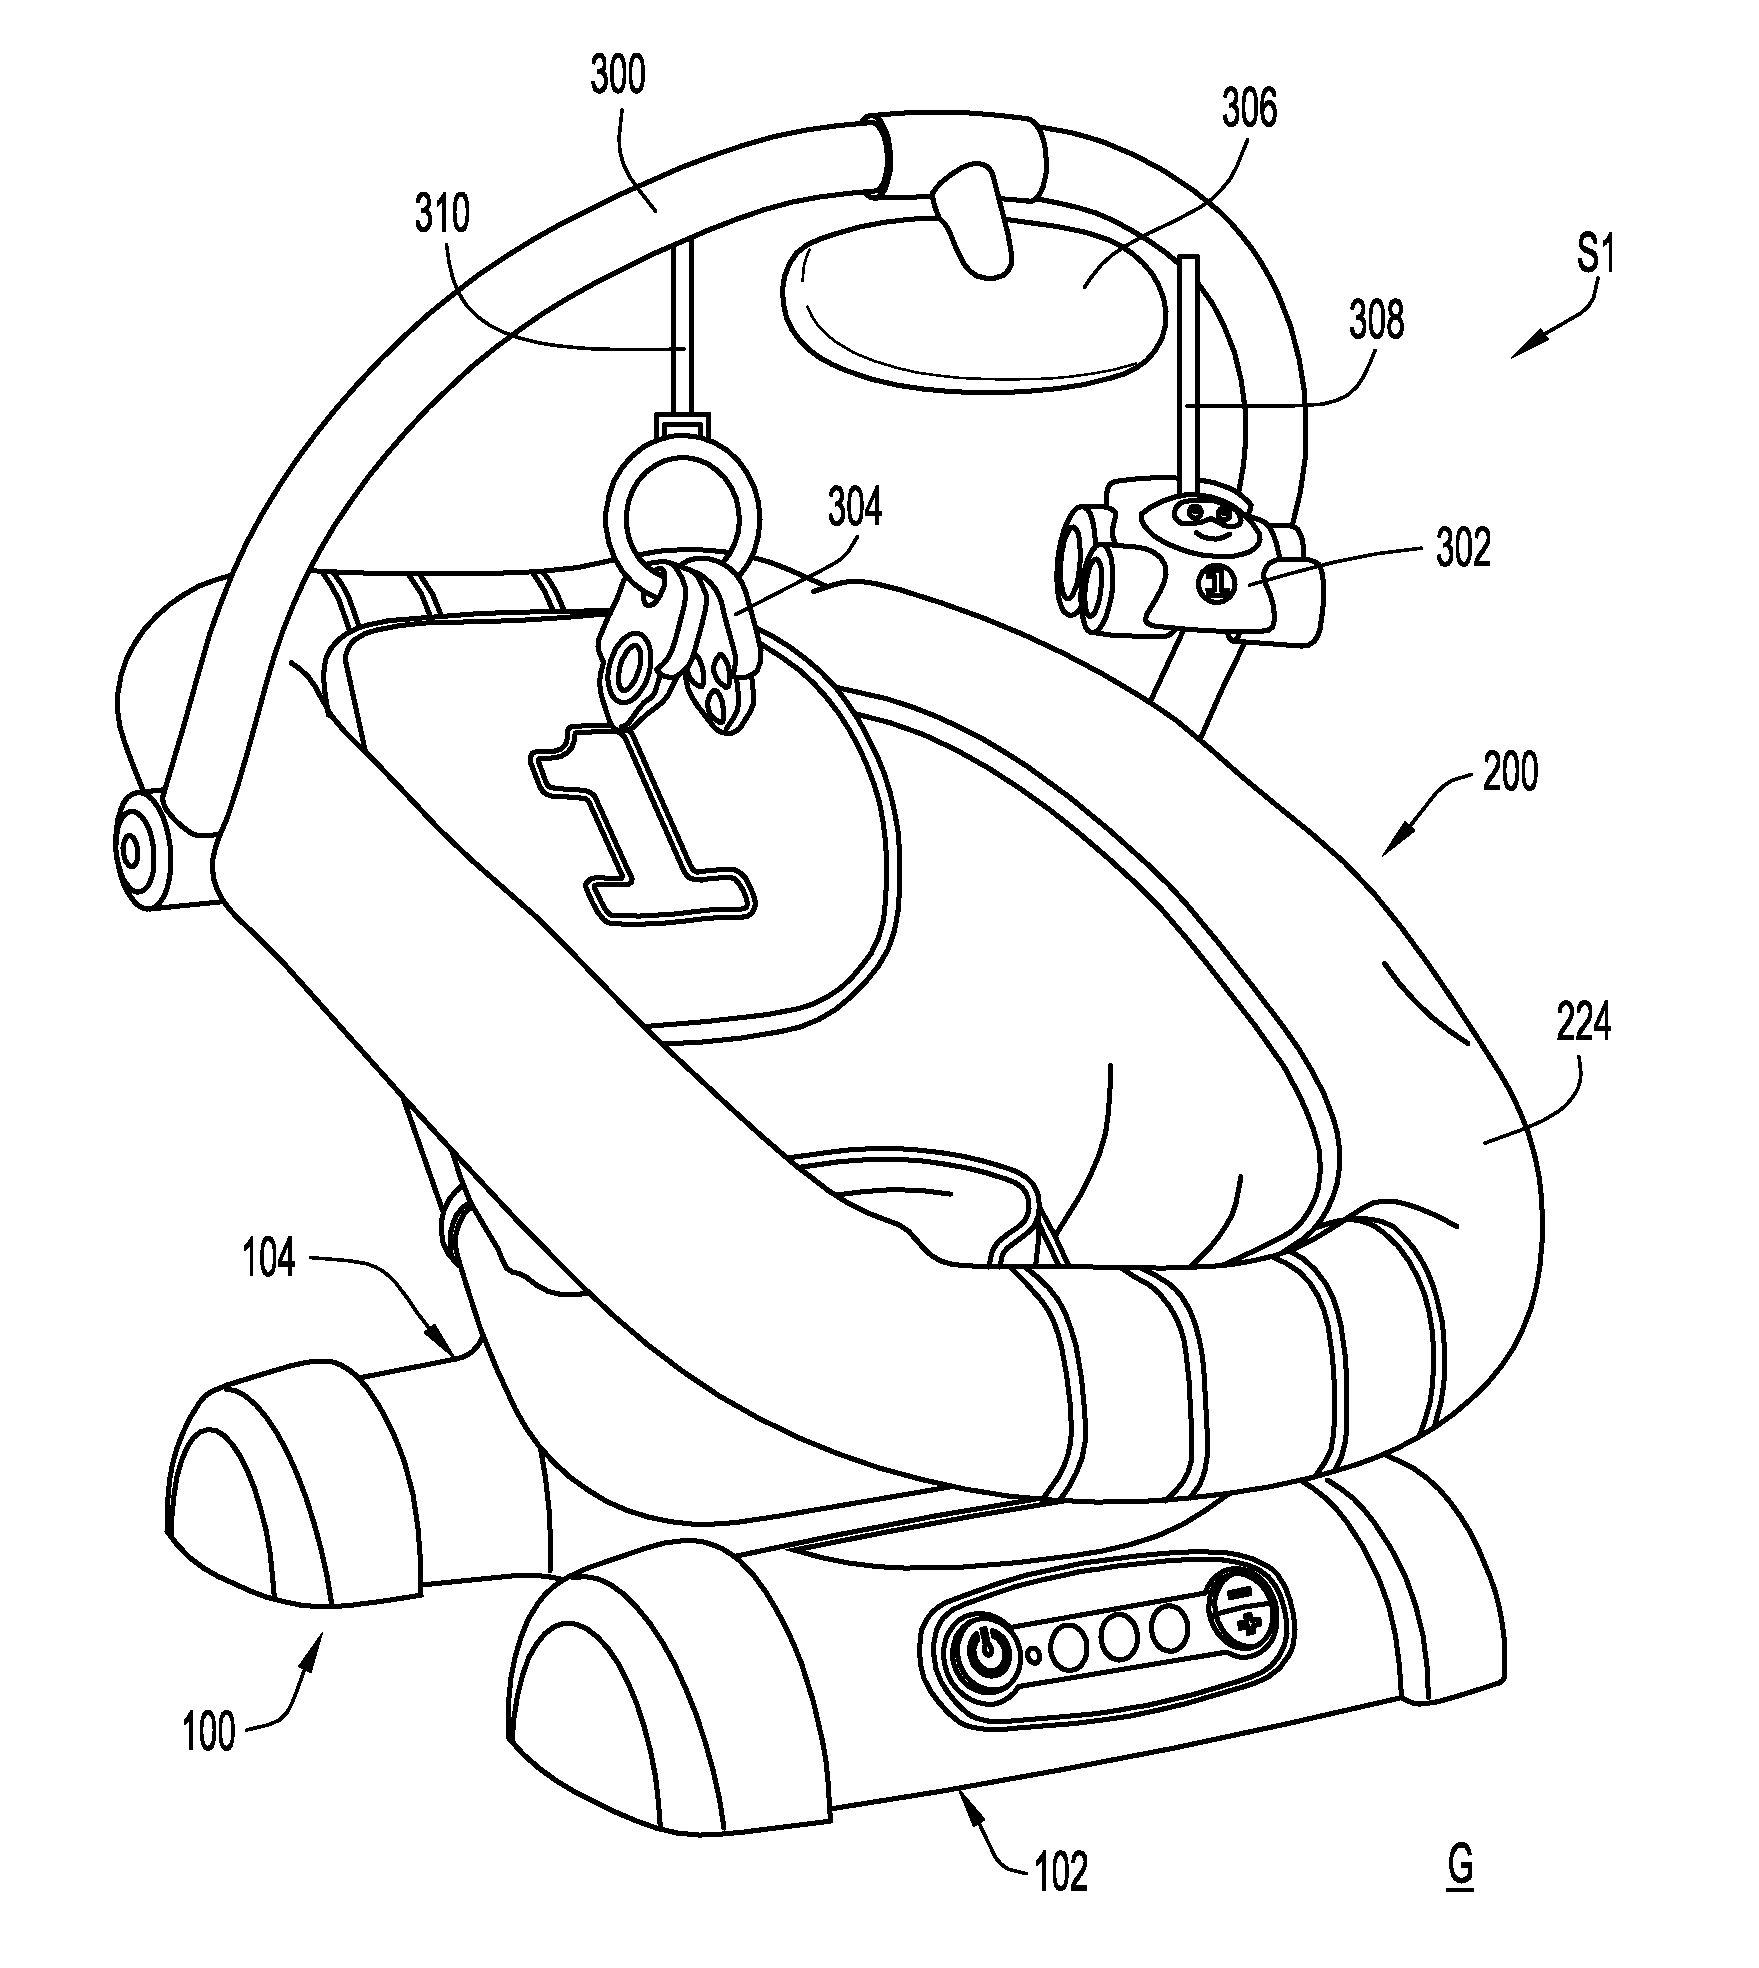 Undulating Motion Infant Support Structure